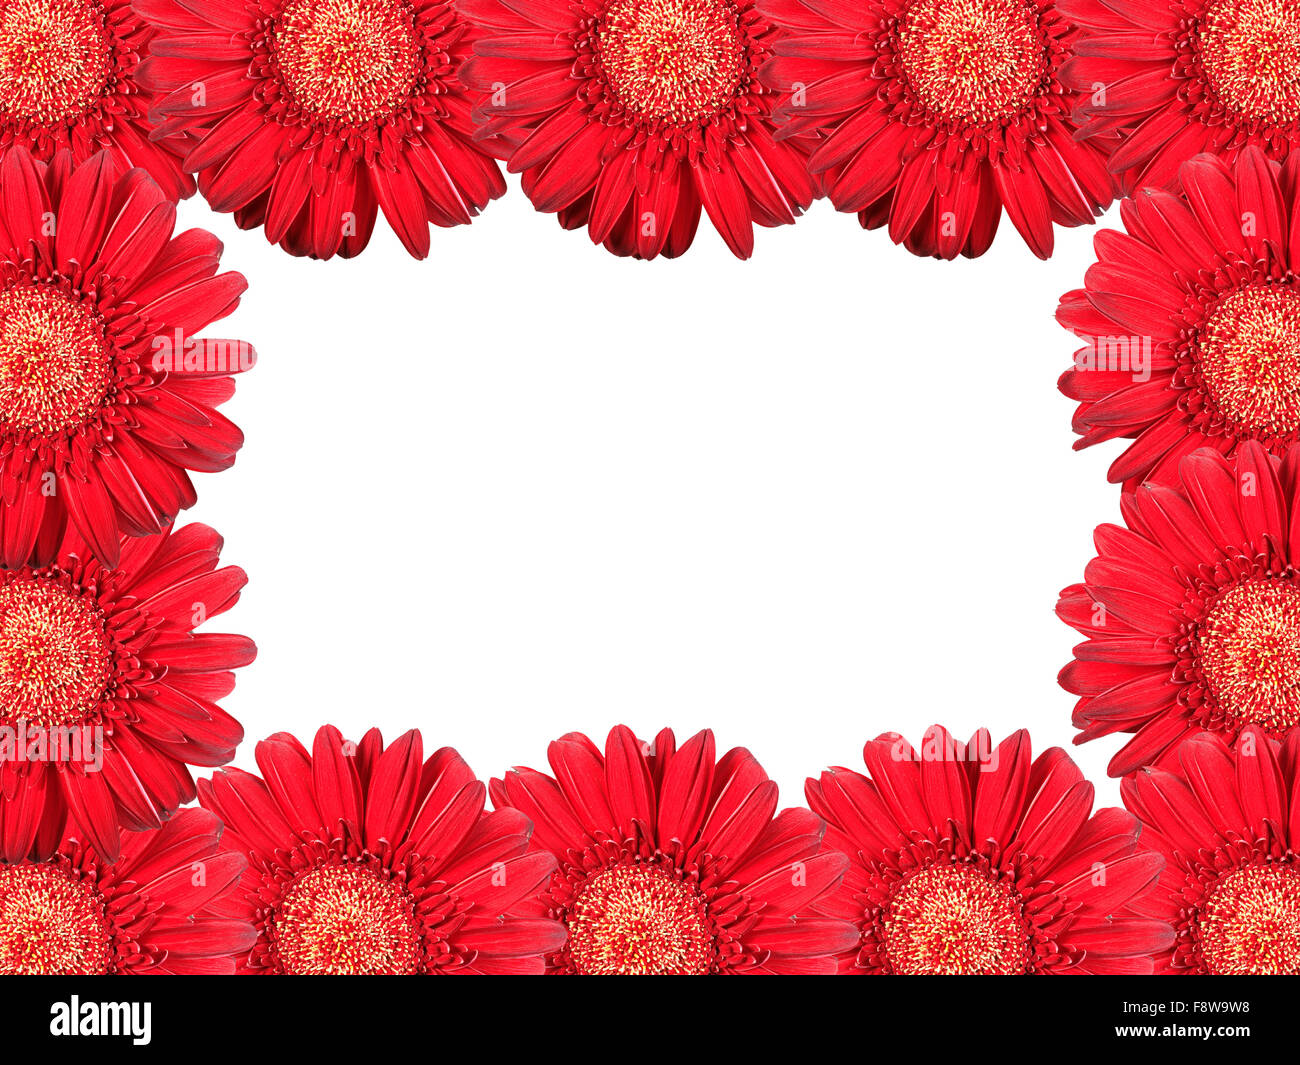 Abstract frame with red flowers Stock Photo